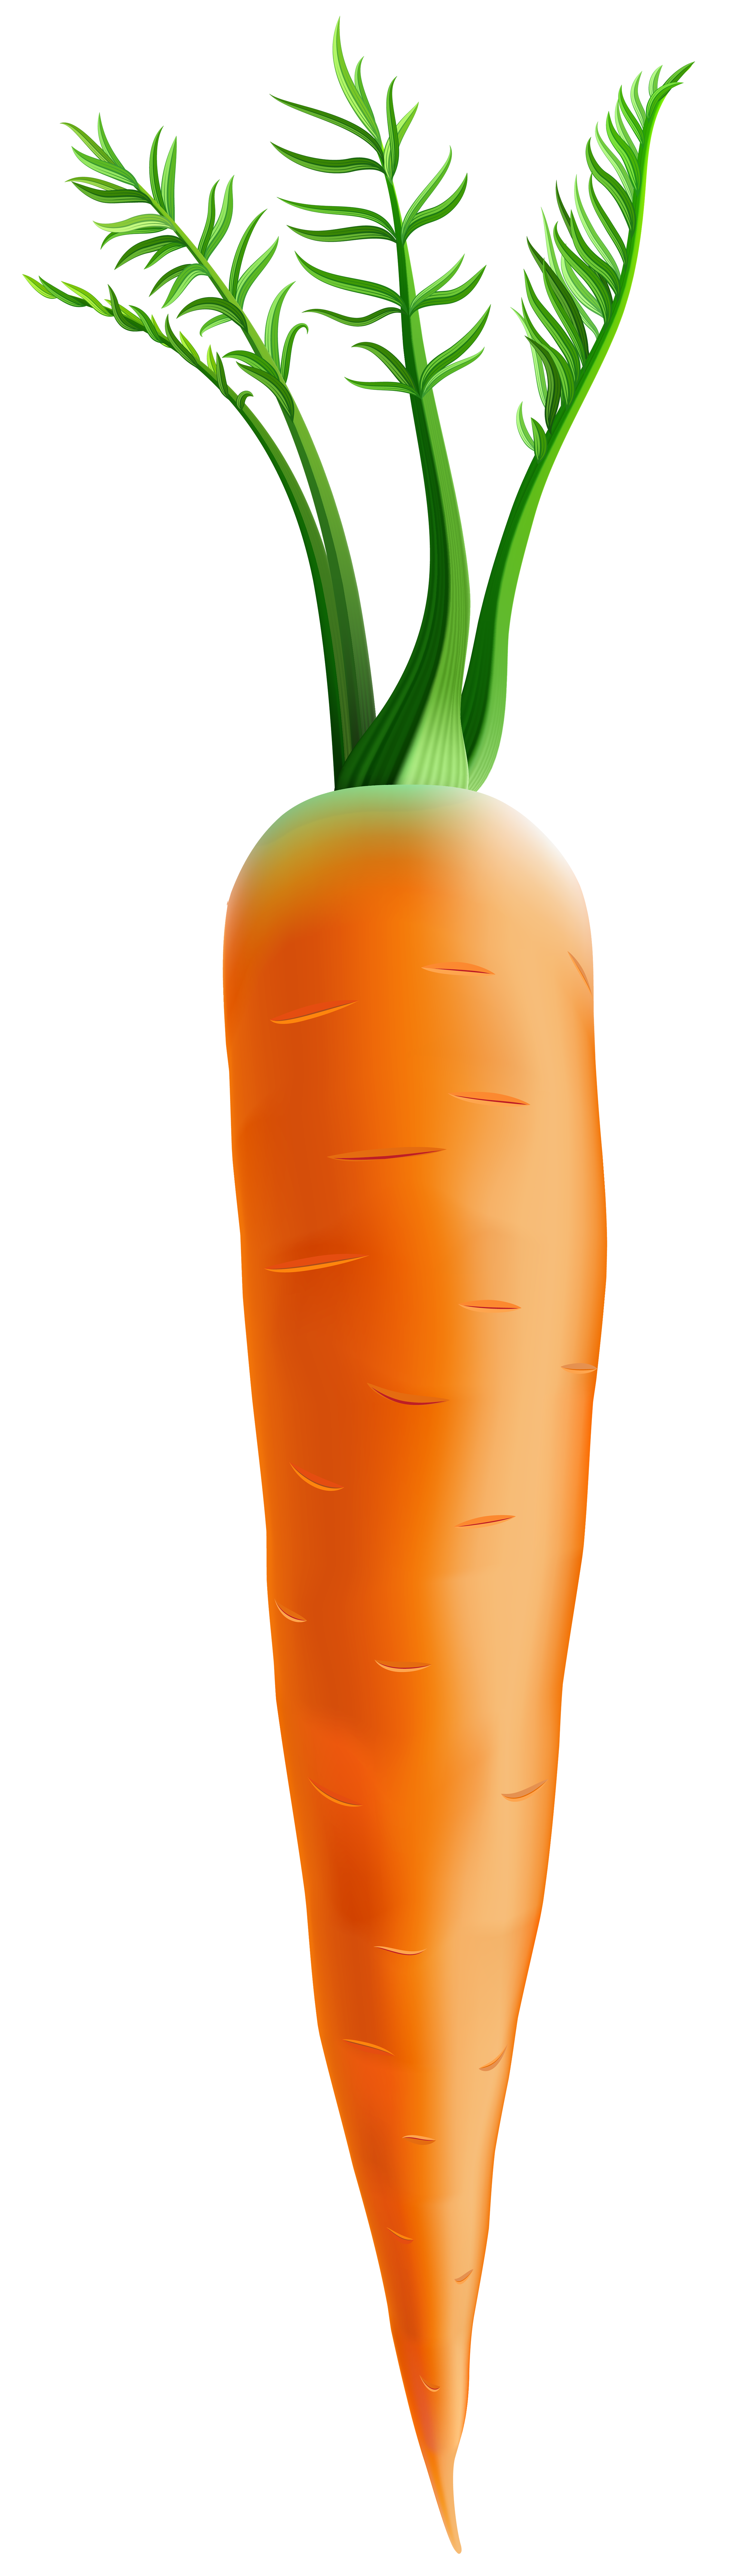 Carrot PNG Clip Art Image